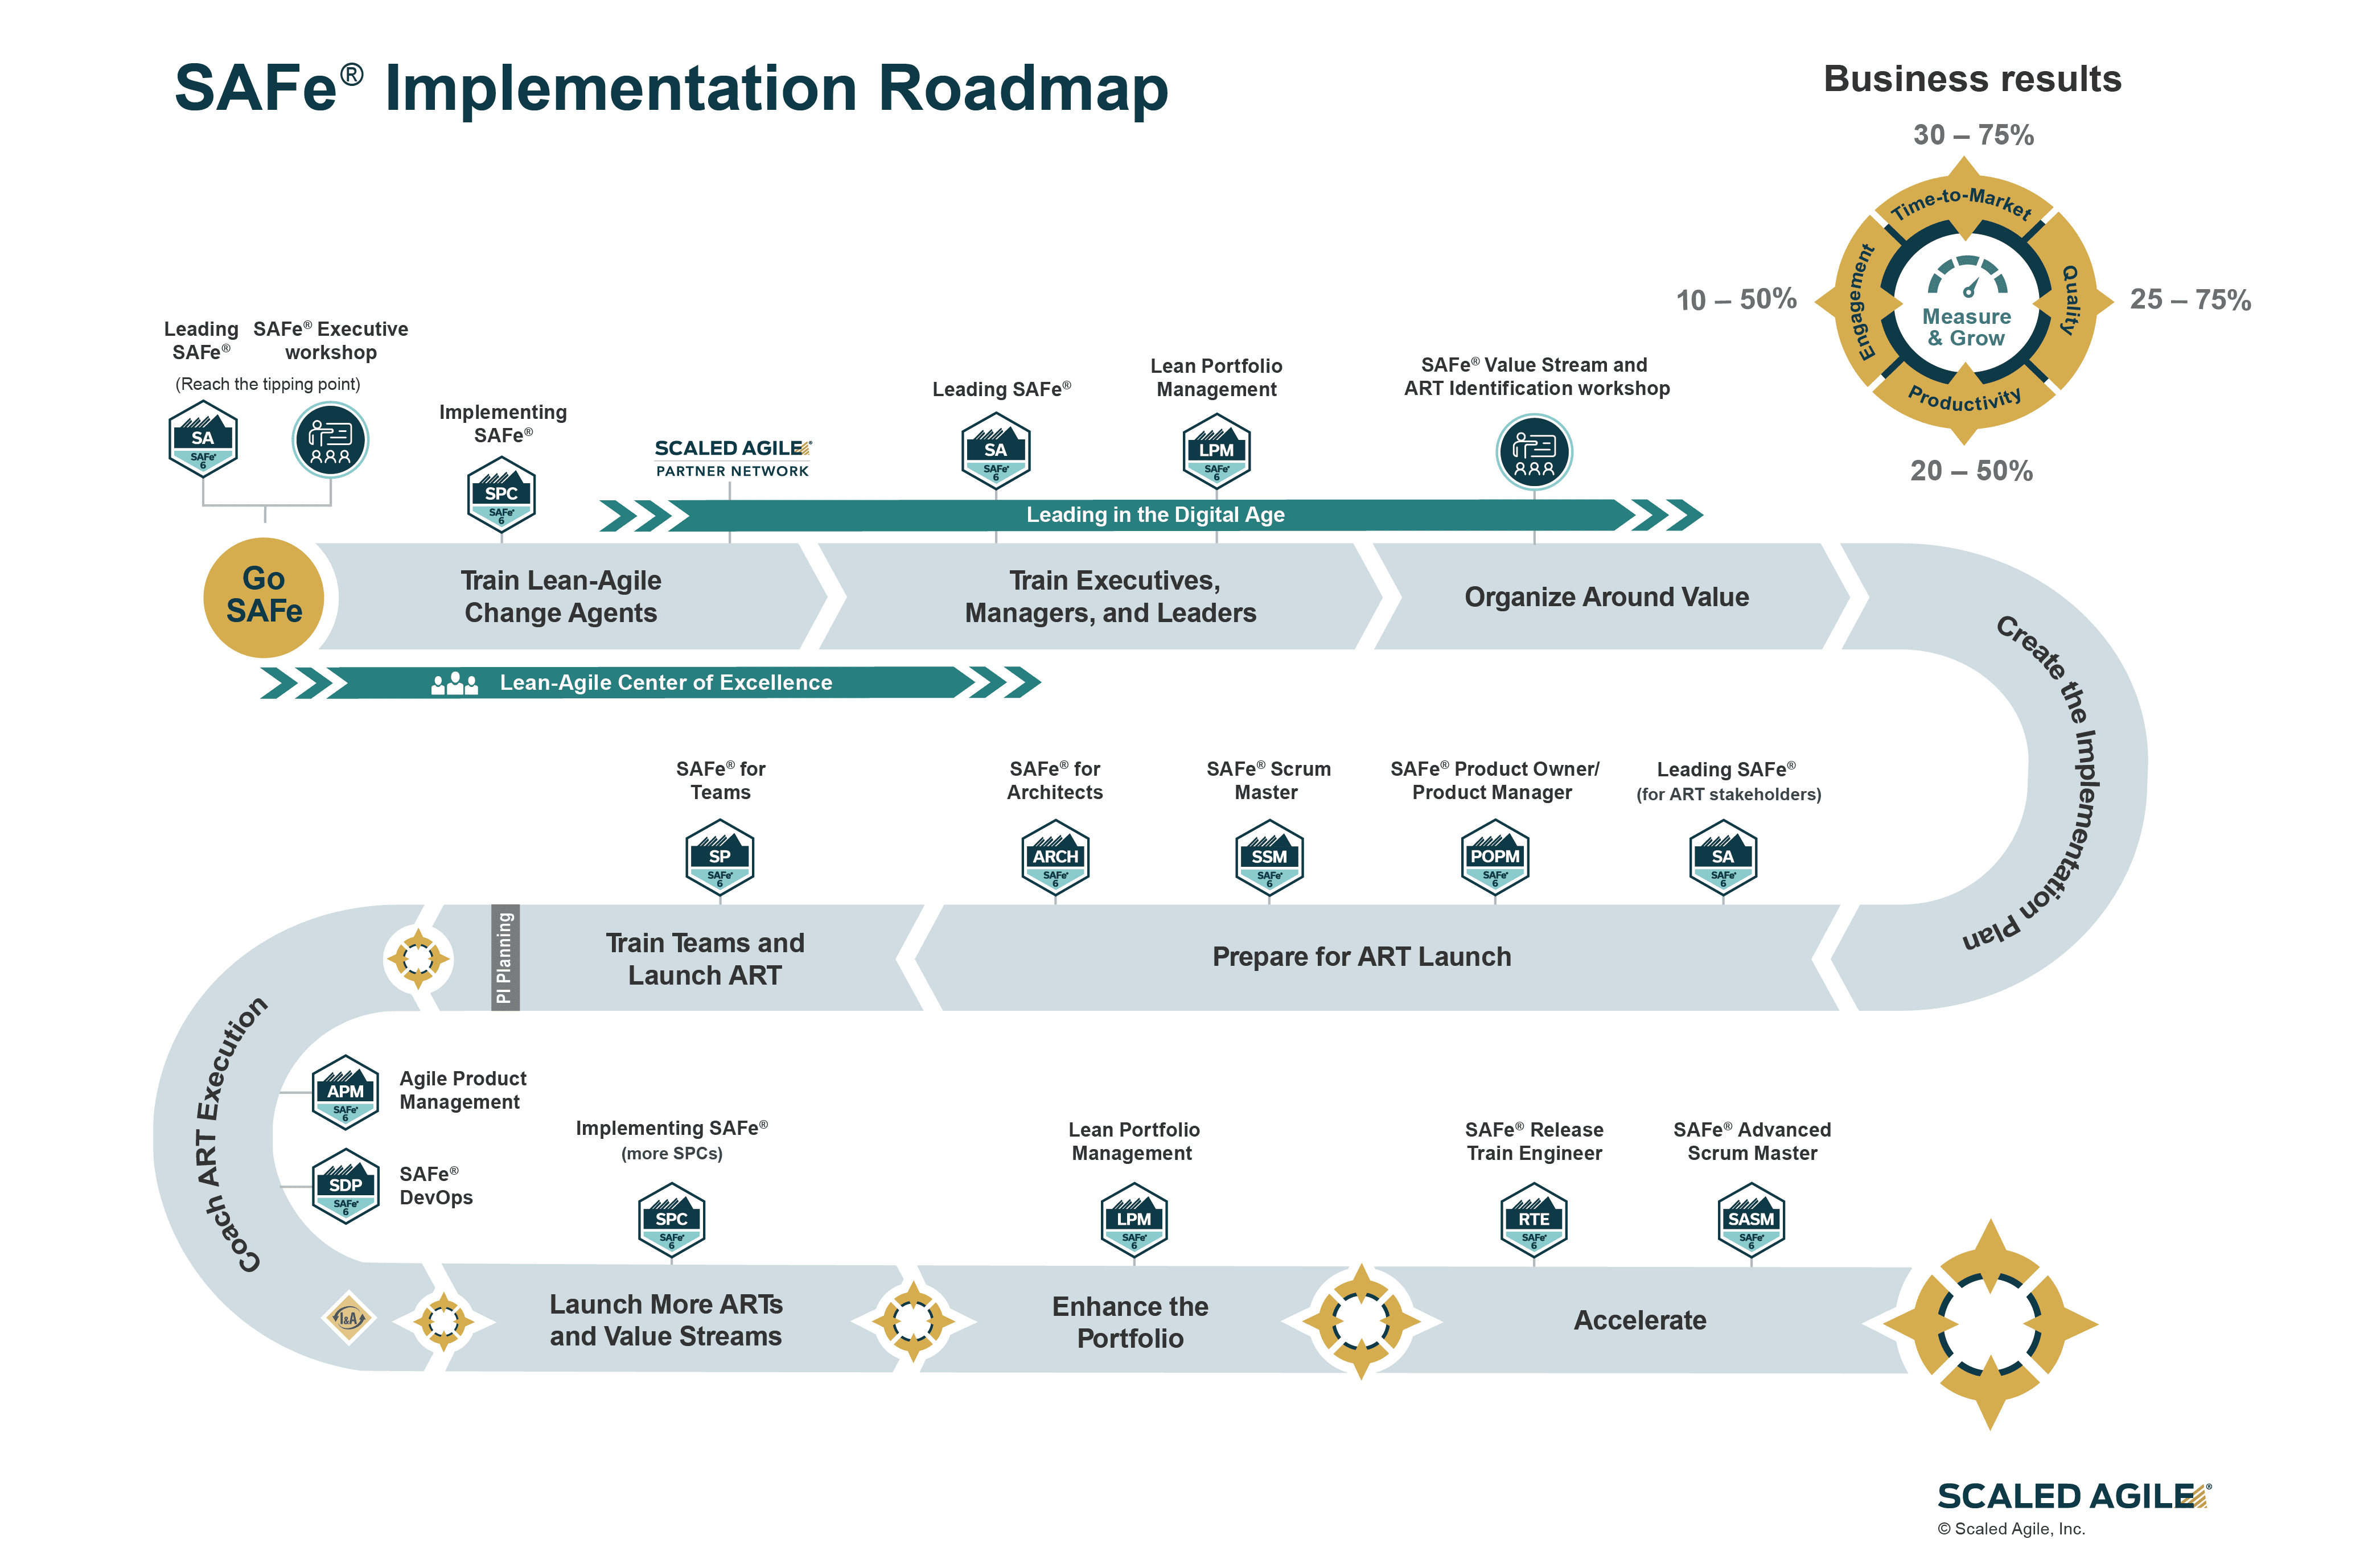 Implementing SAFe roadmap